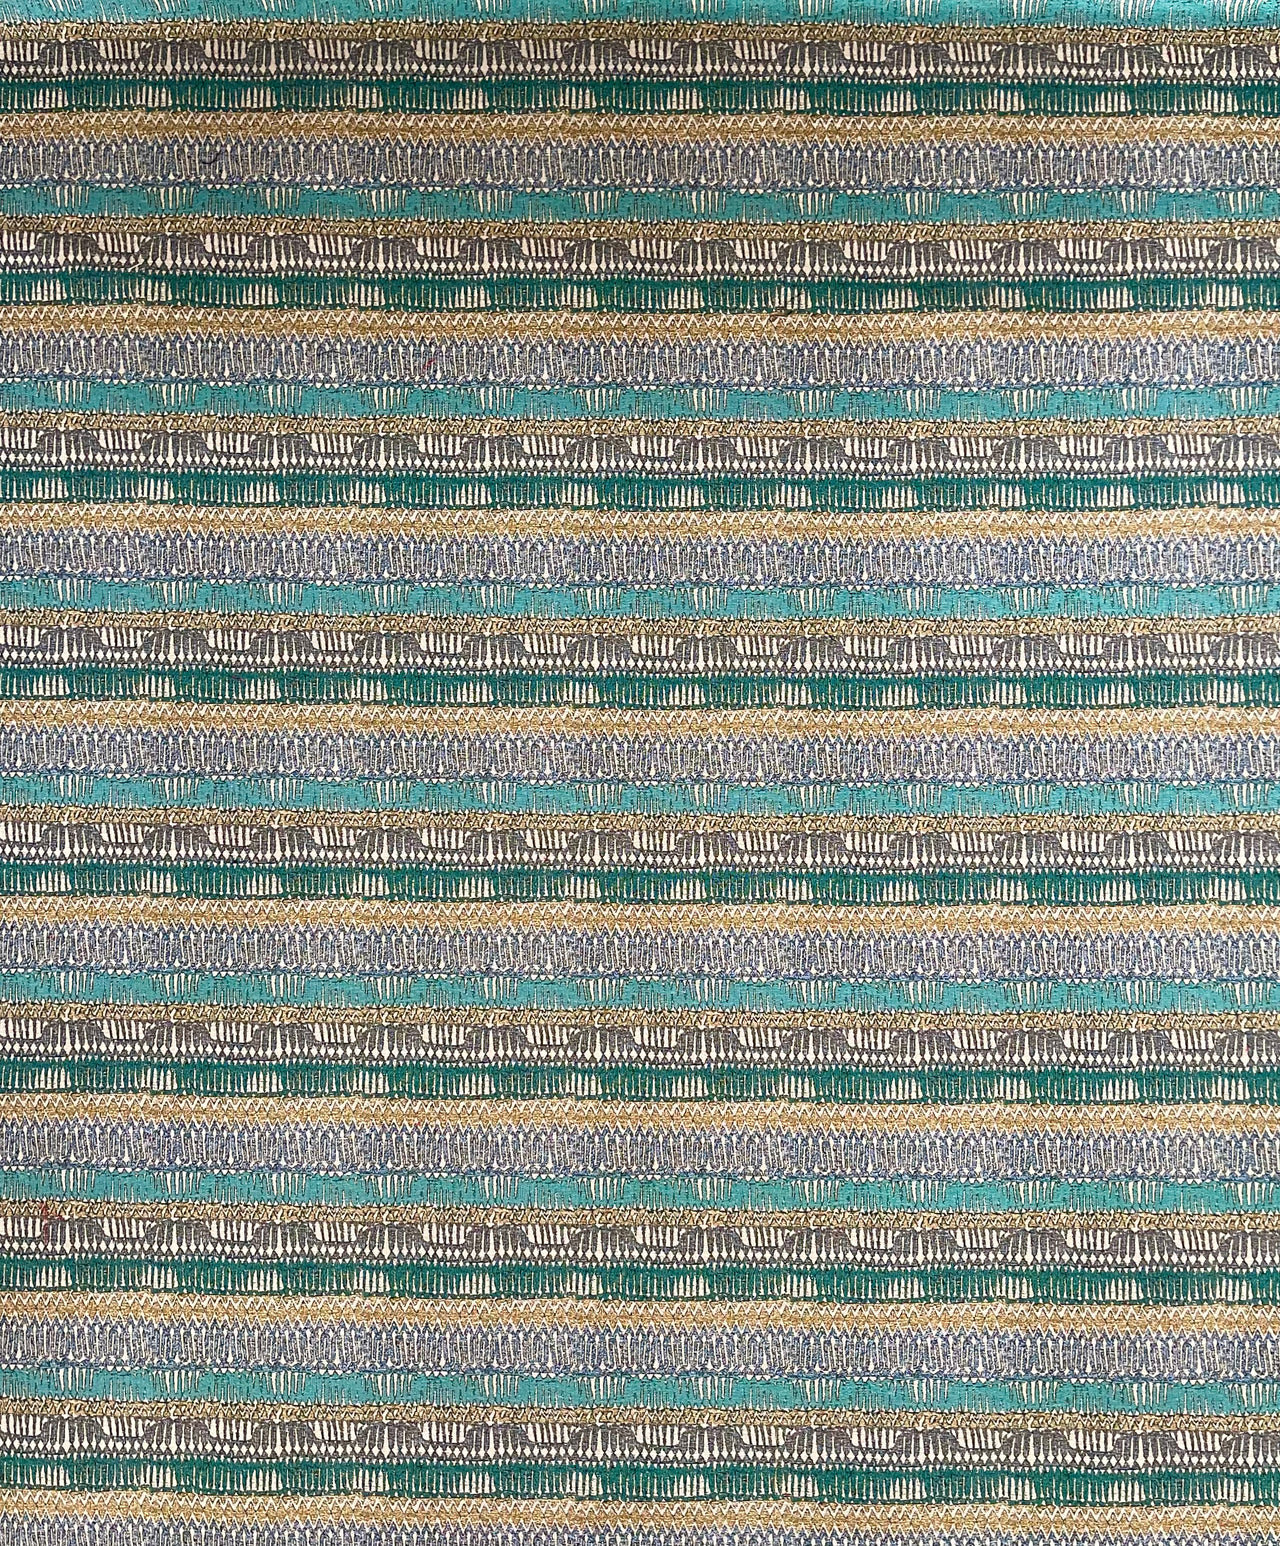 Moroccan-Inspired Kilim Afghan Old Rug: Blue, Yellow, and Green Stripes - Elevate Your Unique Home Decor - Sold by the Metre